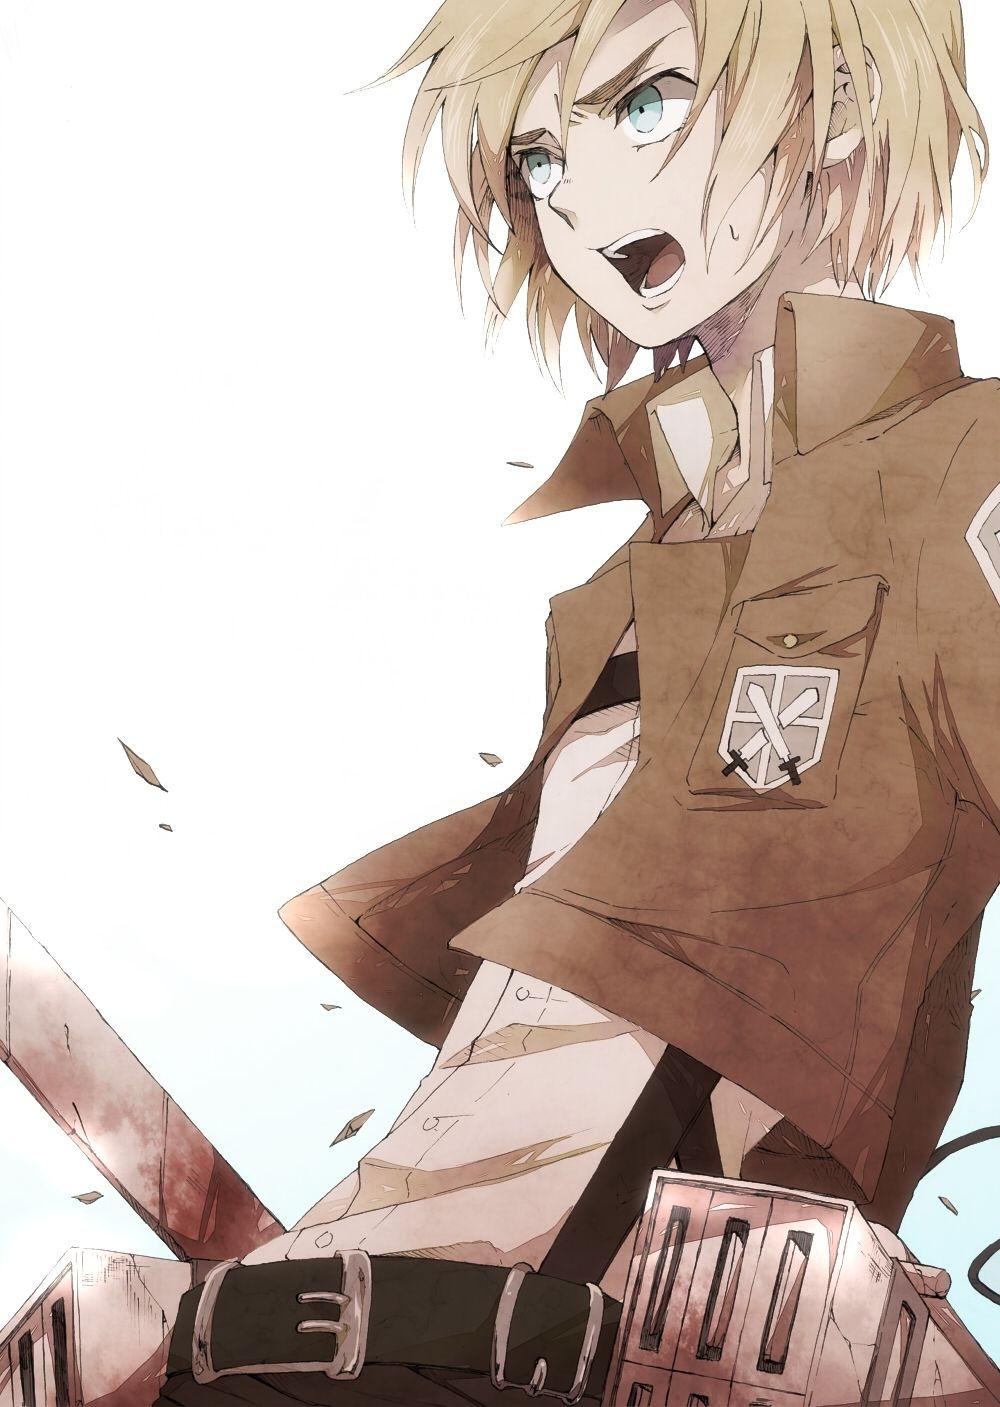 Featured image of post Armin Arlert Manga Wallpaper - Zerochan has 464 armin arlert anime images, wallpapers, android/iphone wallpapers, fanart, cosplay pictures, facebook covers, and many more in its gallery.